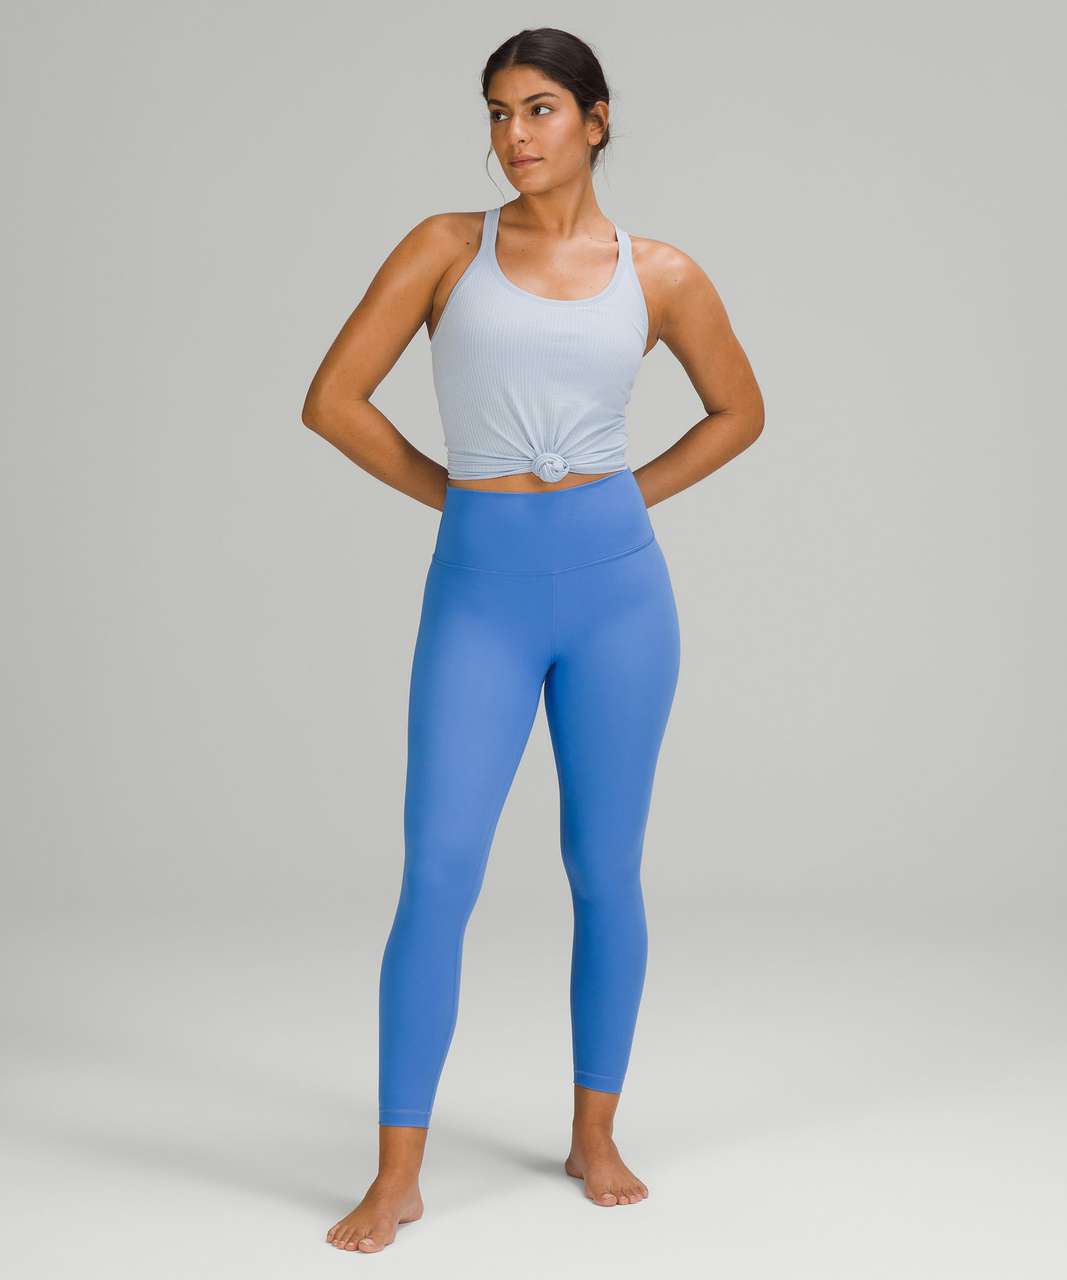 Lululemon Chambray Wunder Under 25” Leggings Blue Size 4 - $60 (38% Off  Retail) - From Taylor